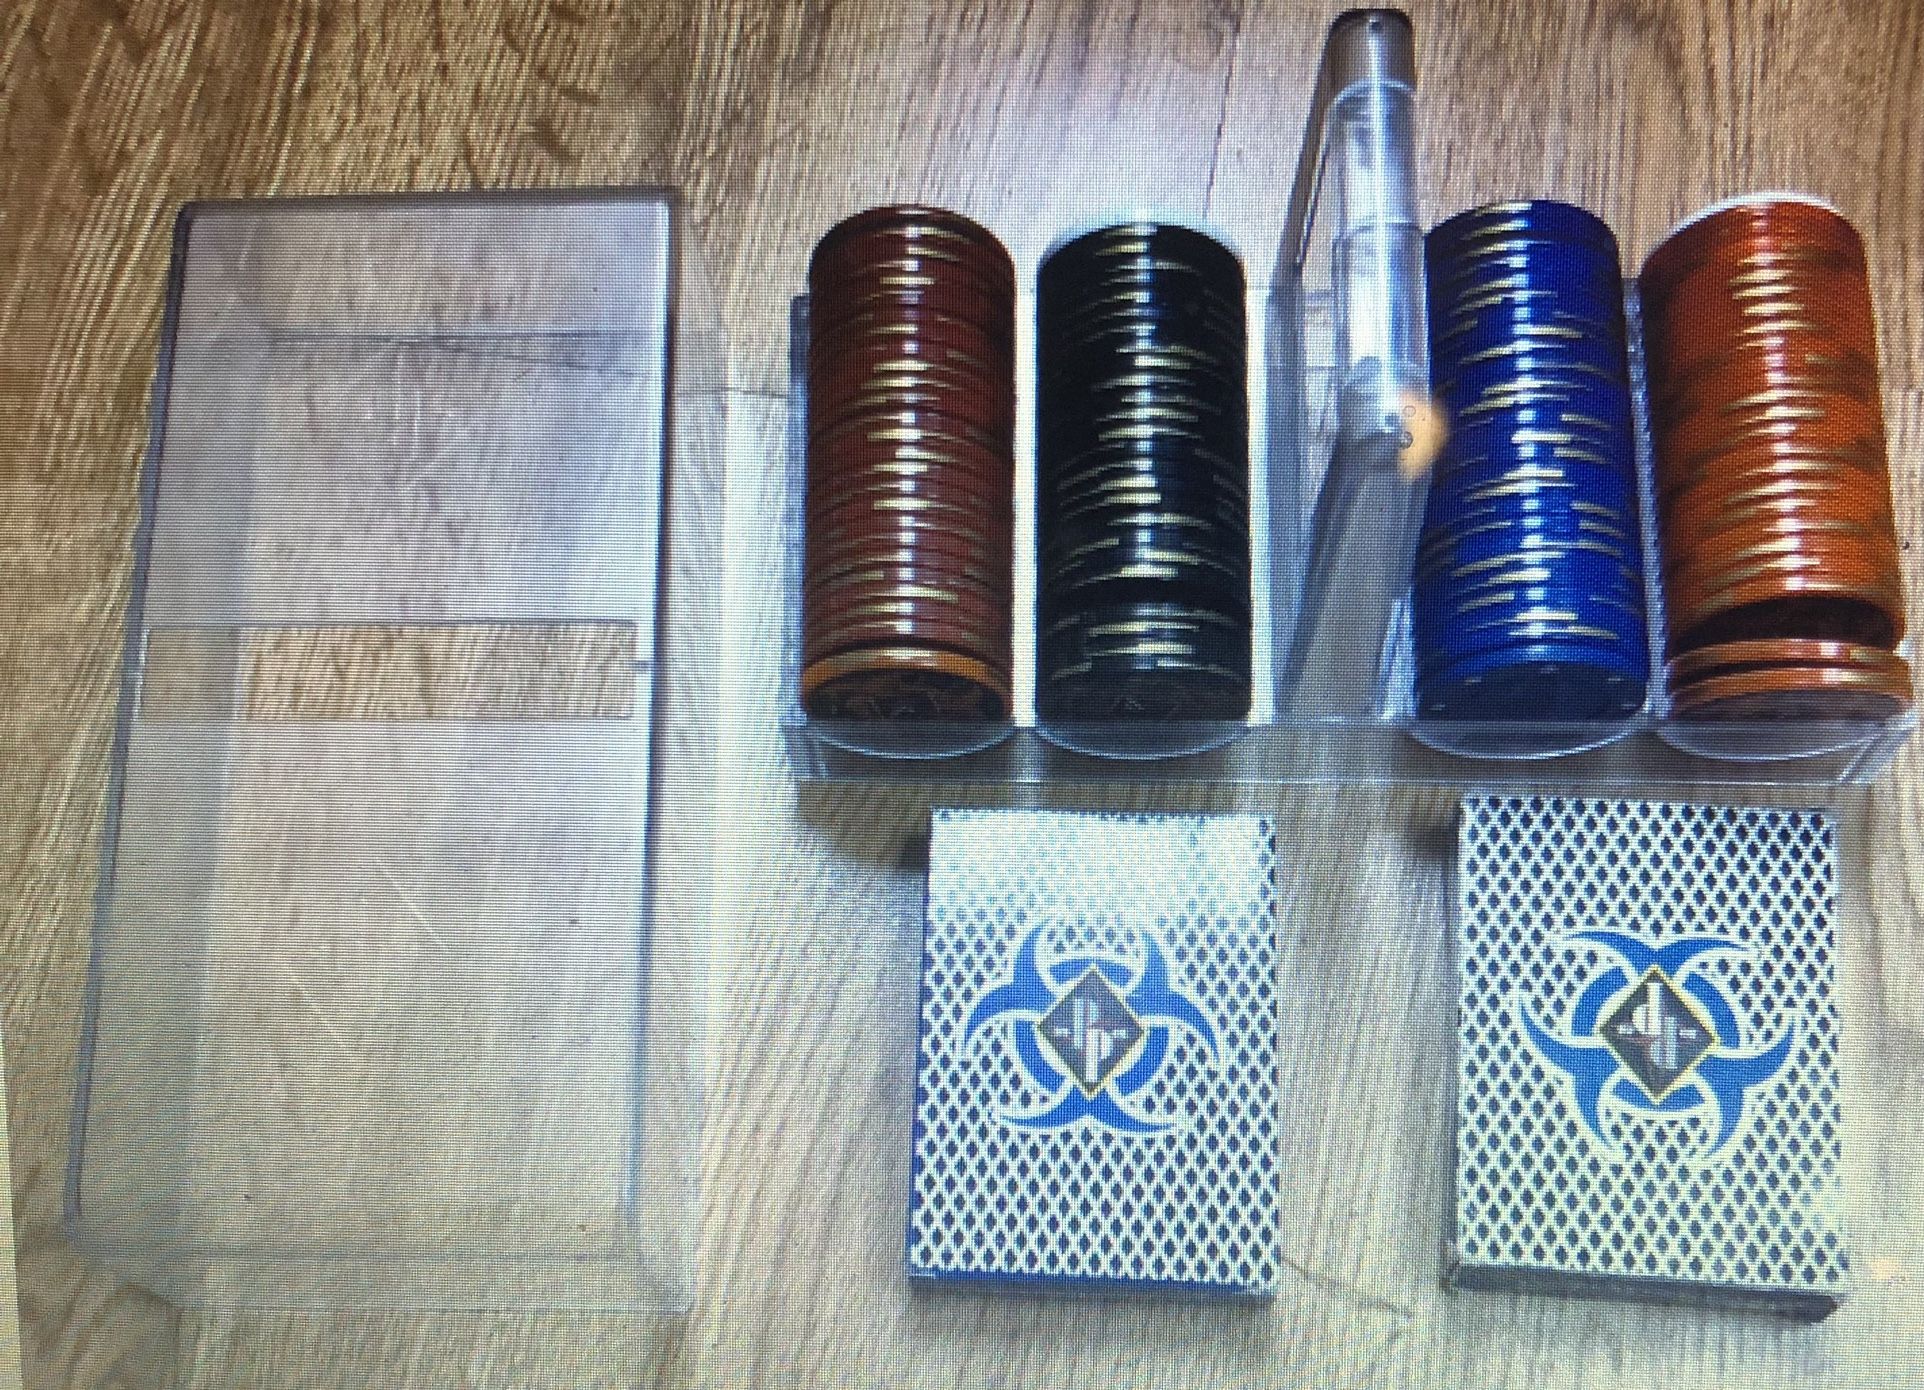 Poker chip set with cards and carrier